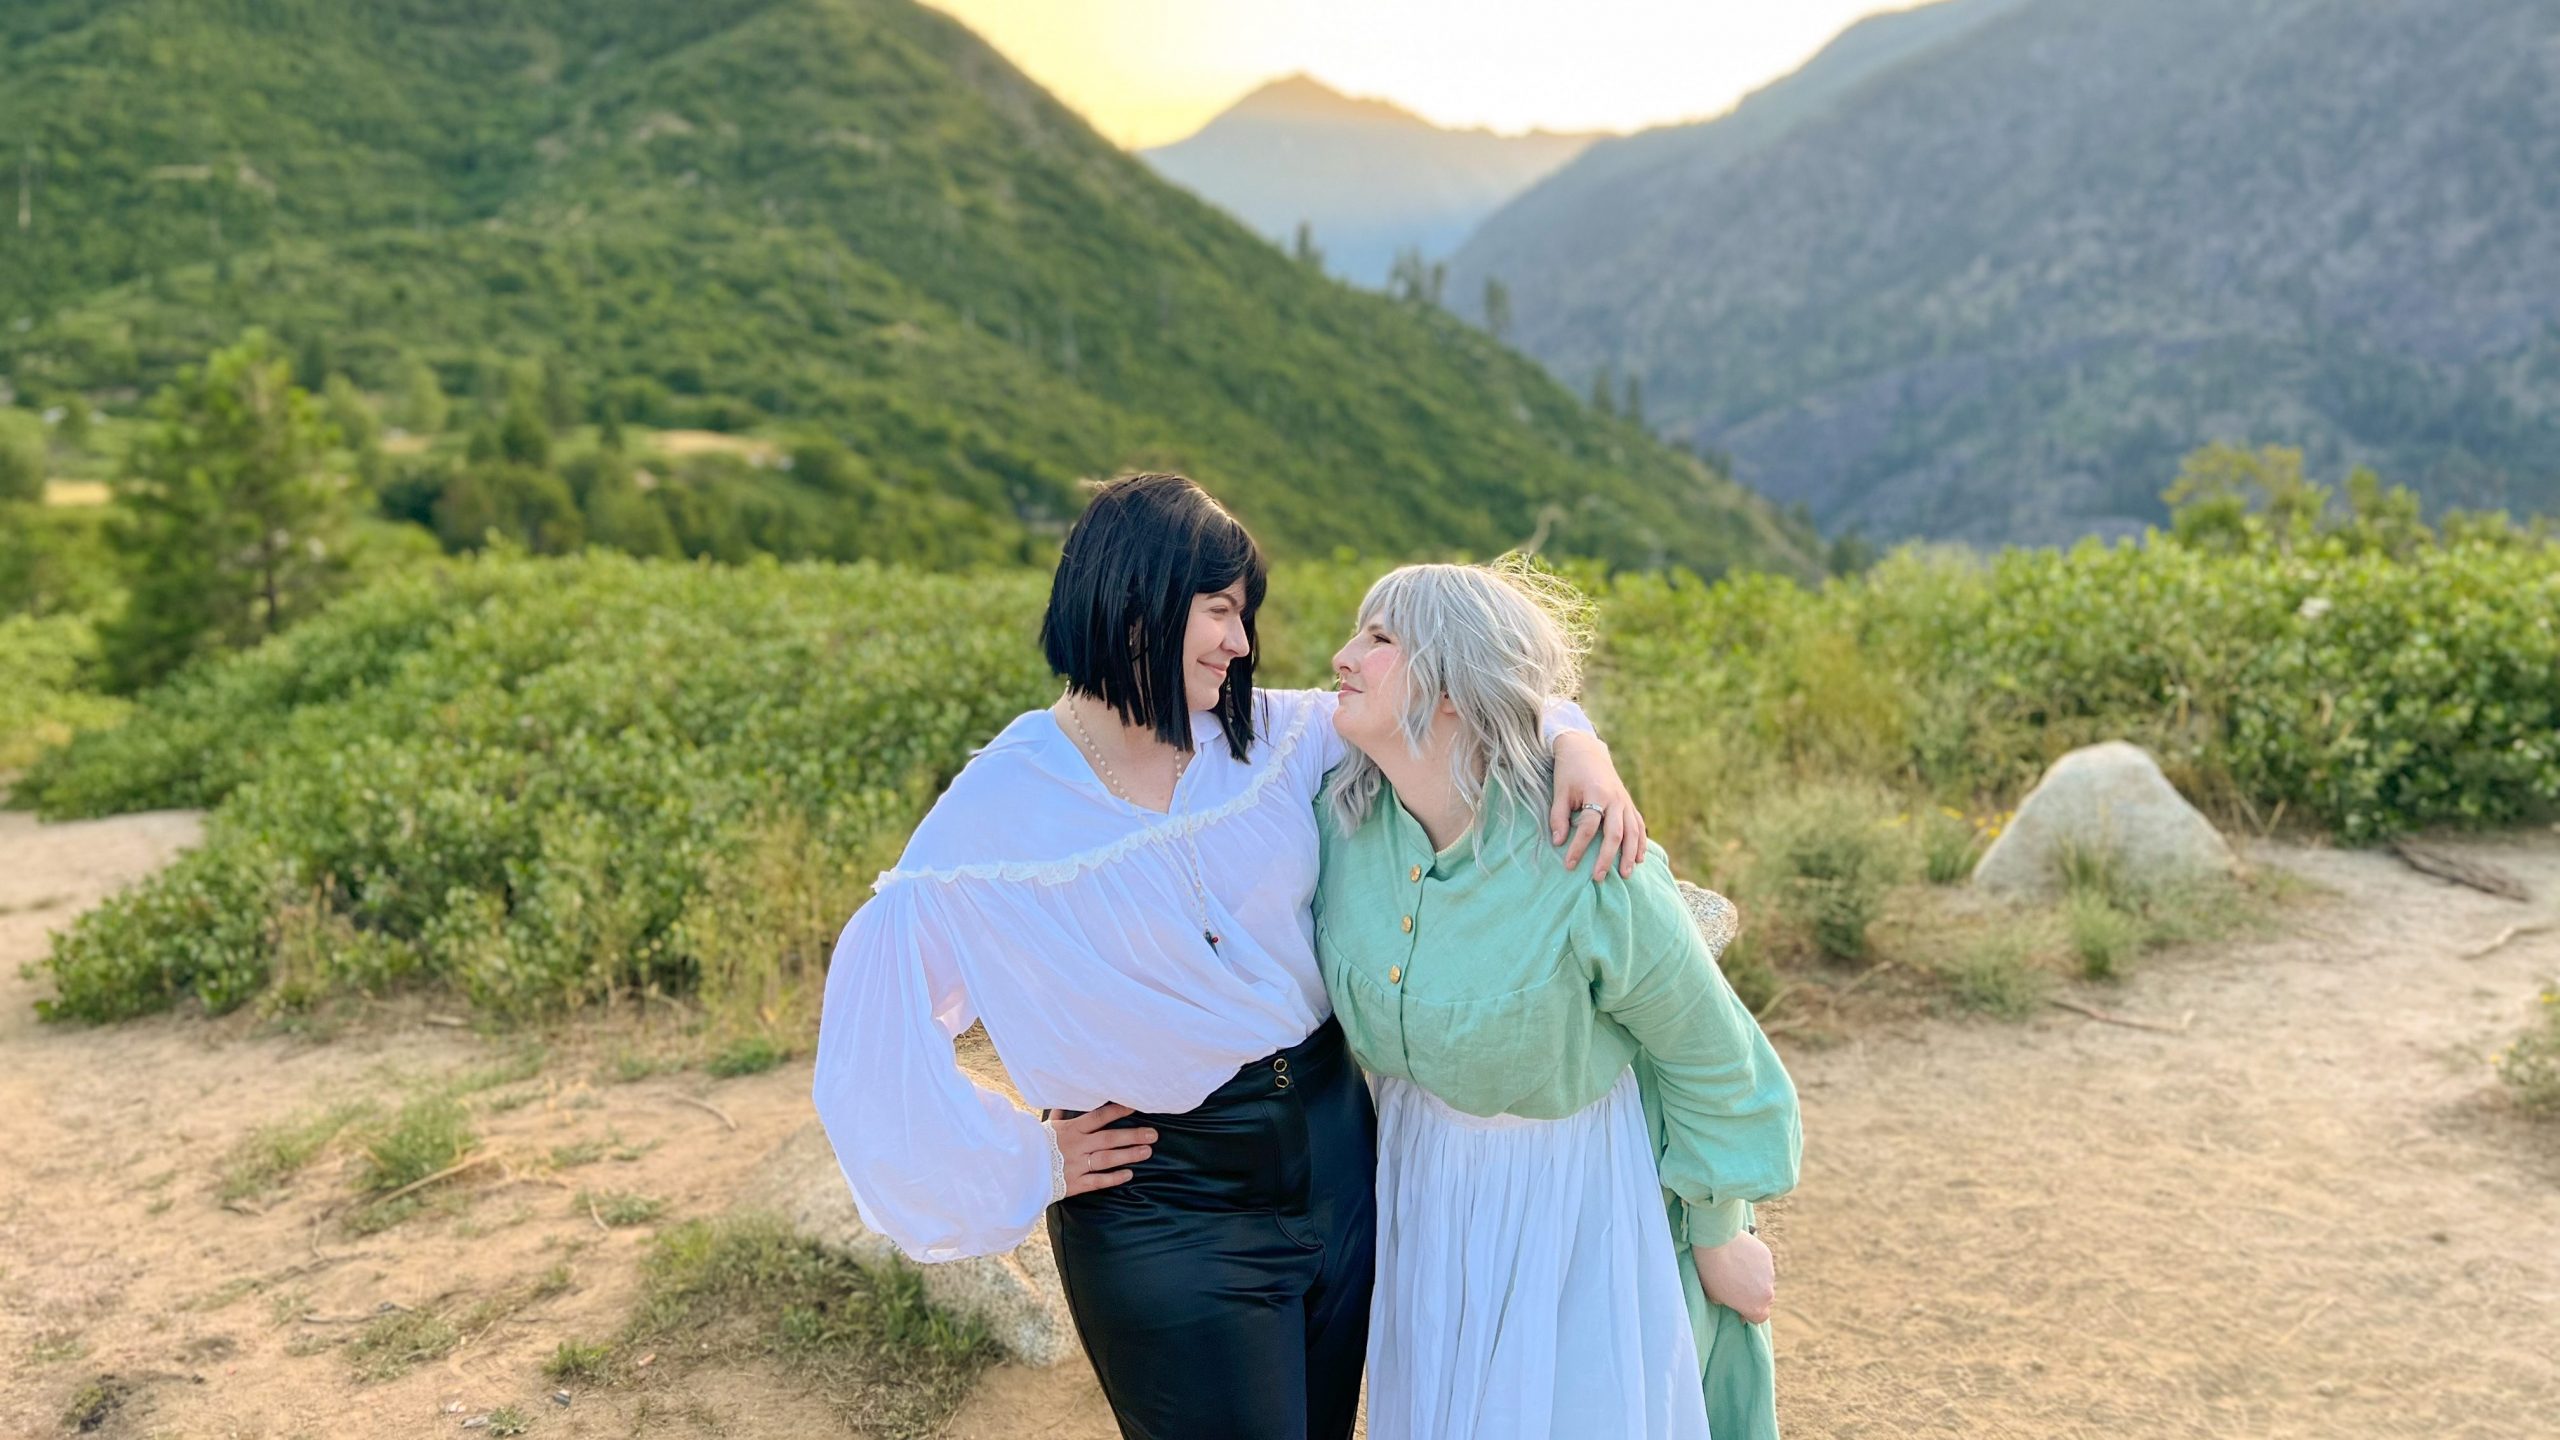 Nicole and Eli as Howl and Sophie gazing into each other eyes while standing in front of a mountain range and setting sun.